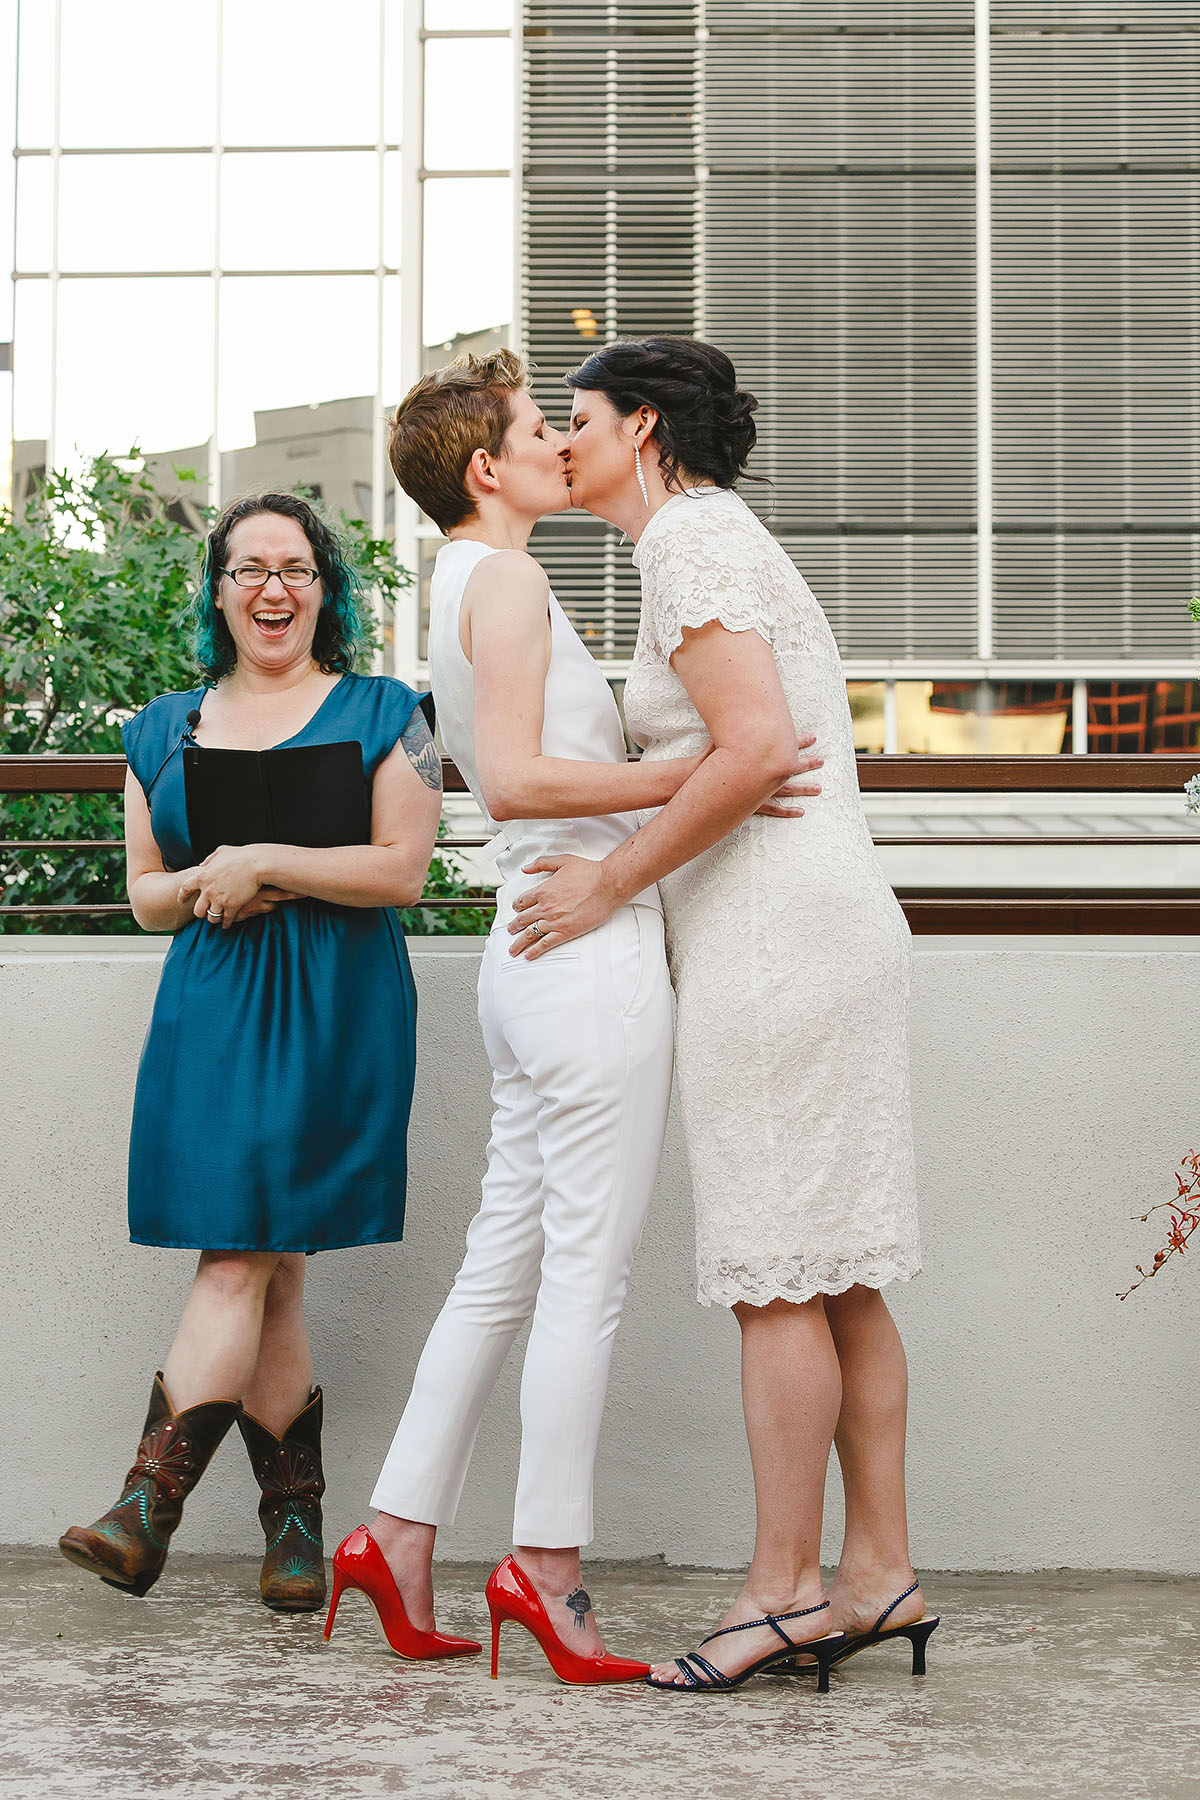 Colorful outdoor rooftop lesbian wedding in Austin, Texas kiss